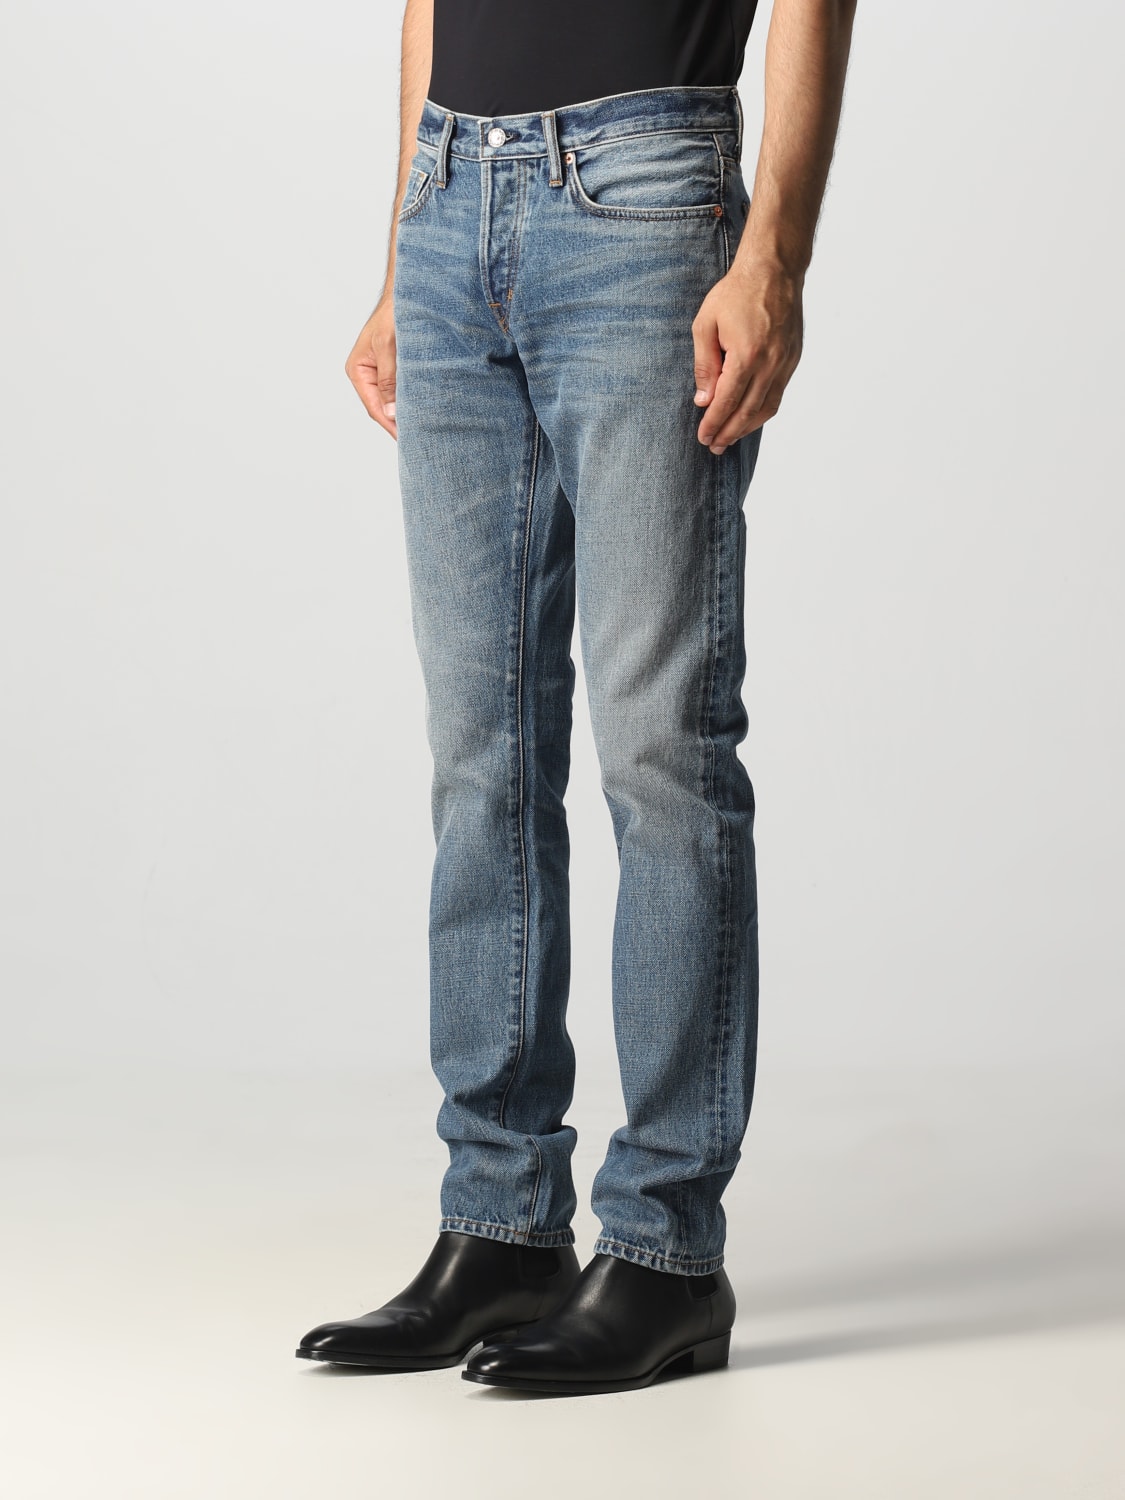 TOM FORD: jeans for man - Blue | Ford jeans DPS001DMC025F23 online at